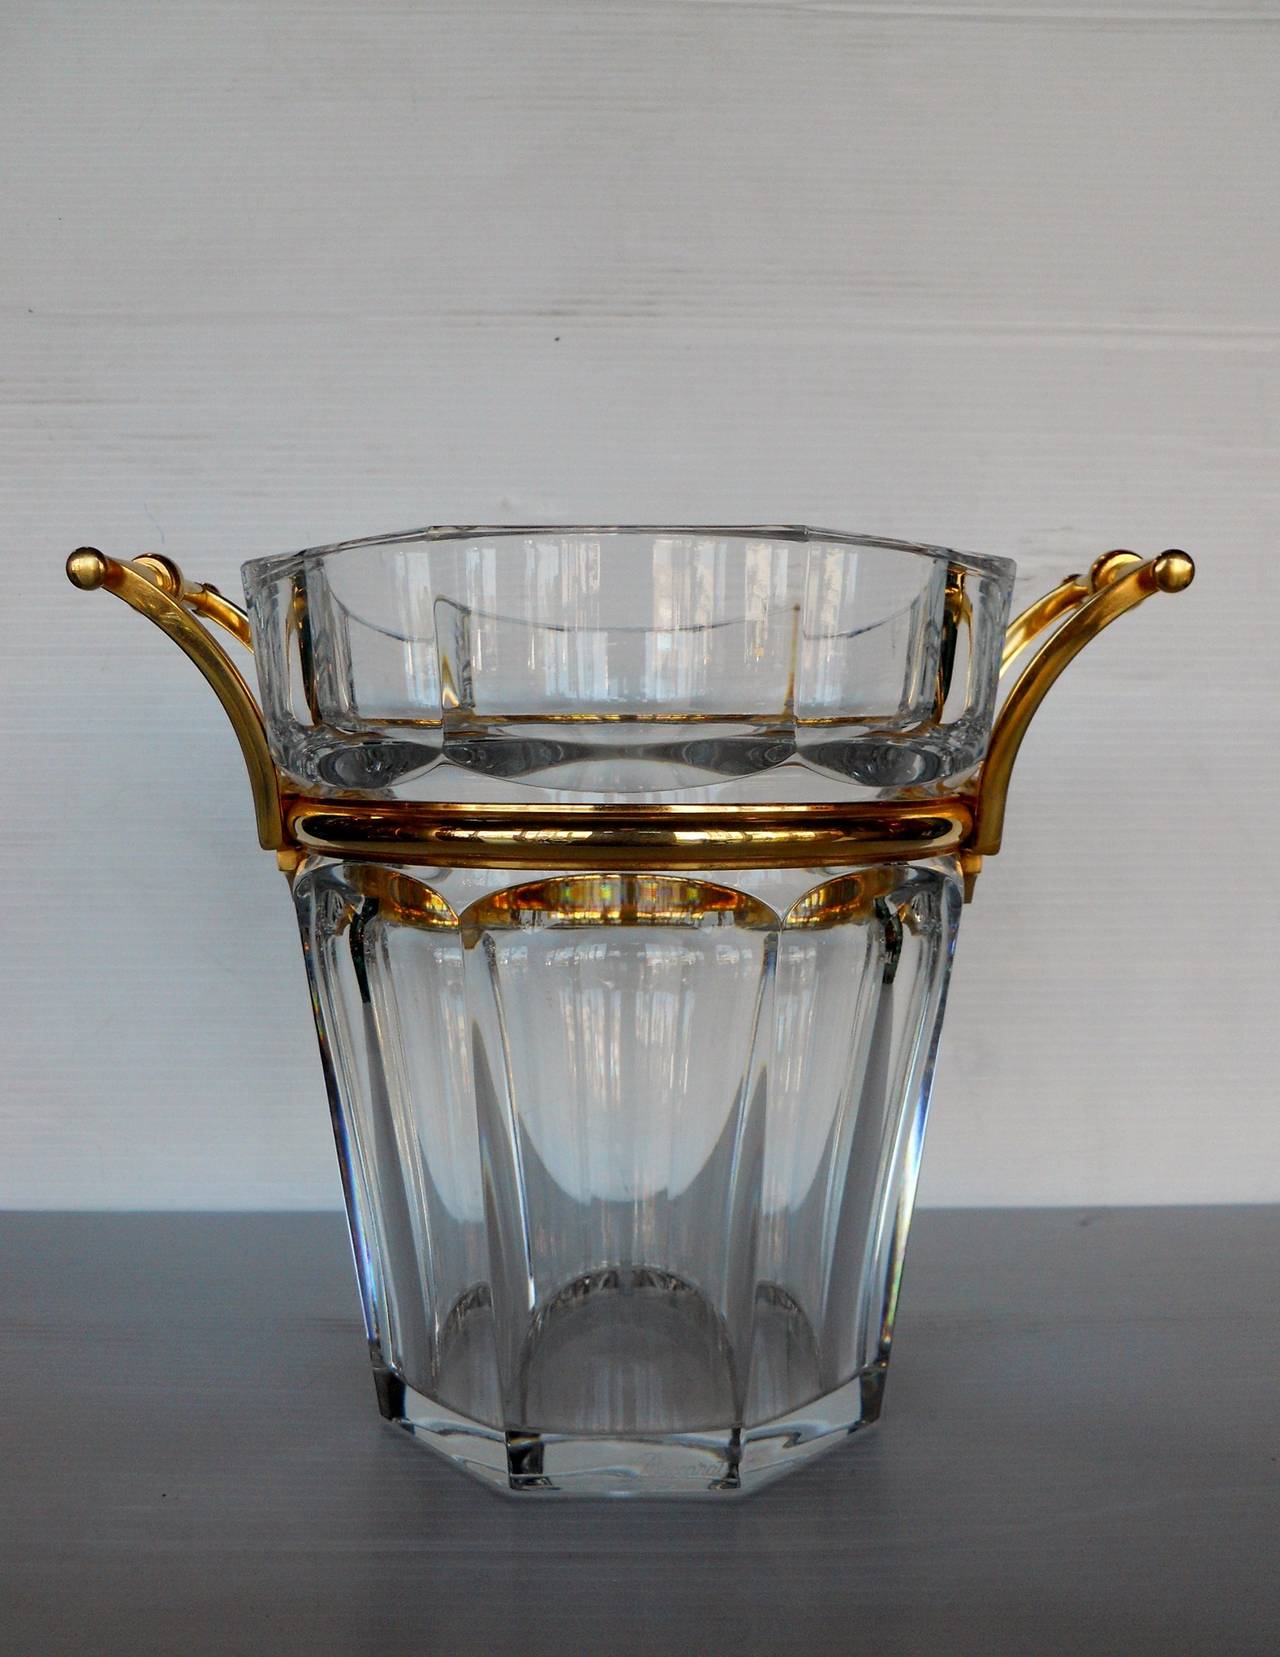 Ultra luxe Baccarat ice bucket.
With the original Baccarat markings on the bottom of the glass piece.
Bronze gold-plated.